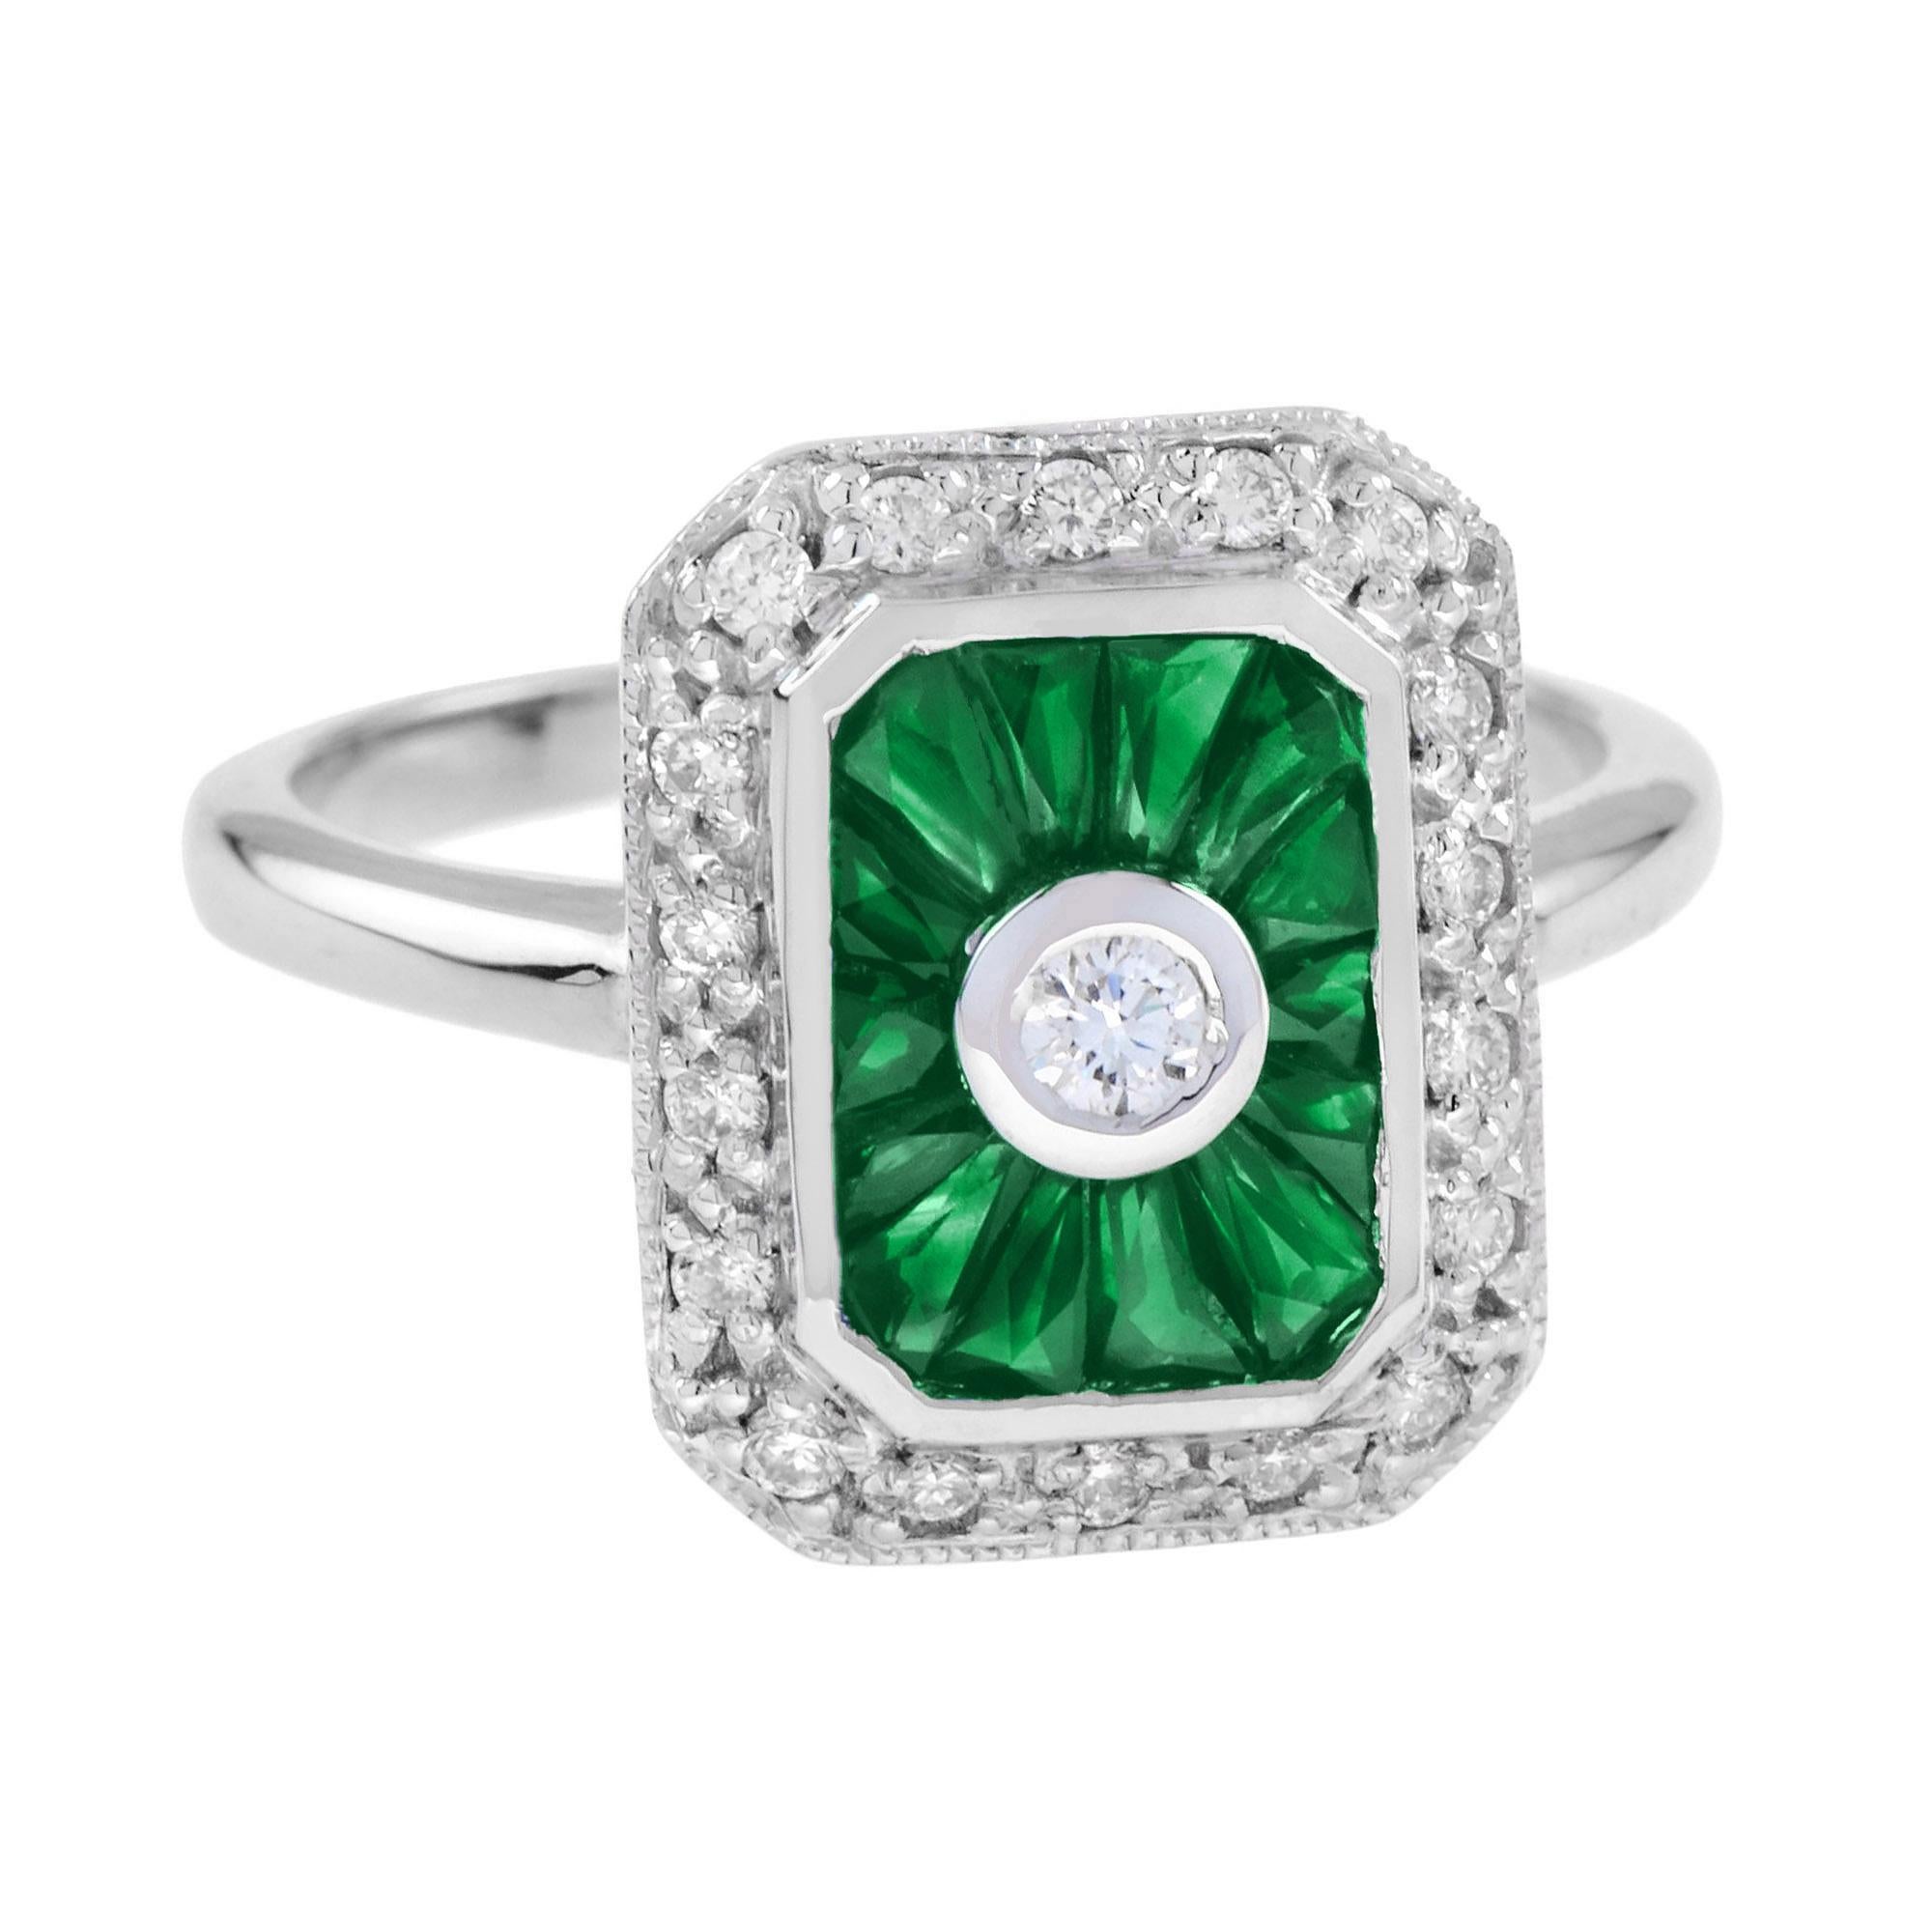 For Sale:  Diamond and Emerald Halo Art Deco Style Engagement Ring in 14K White Gold 3